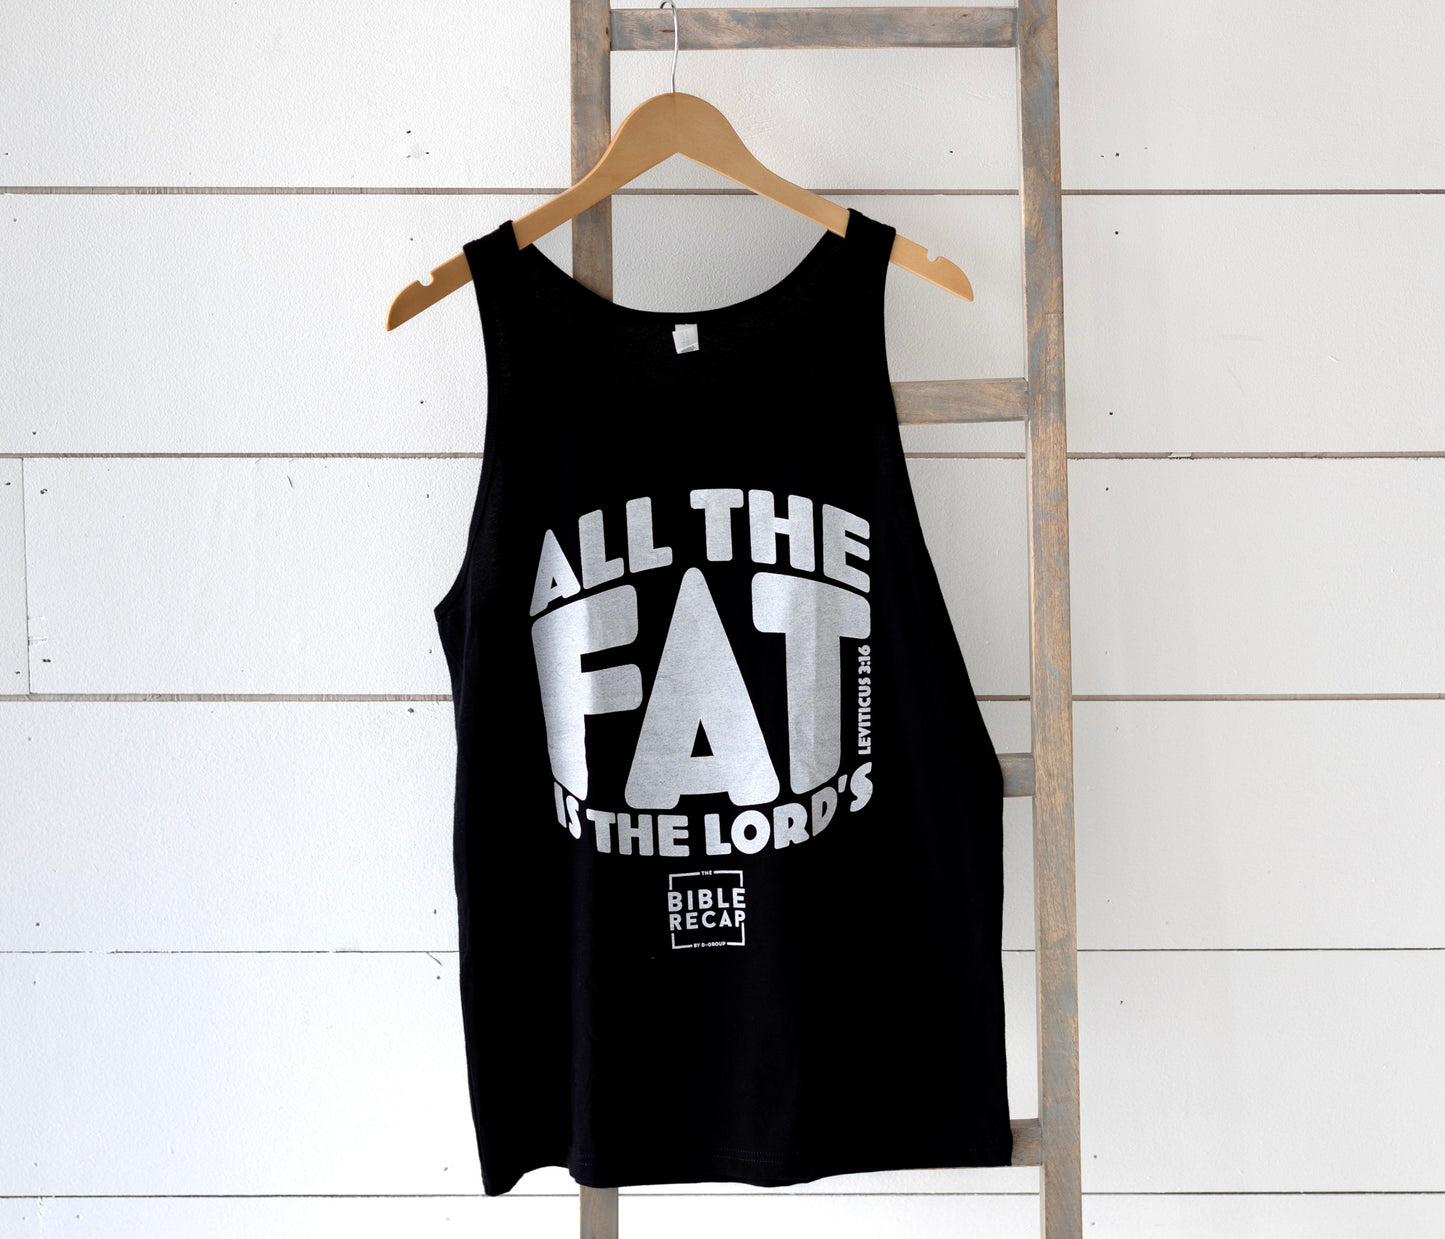 All the Fat is the Lord's Tank